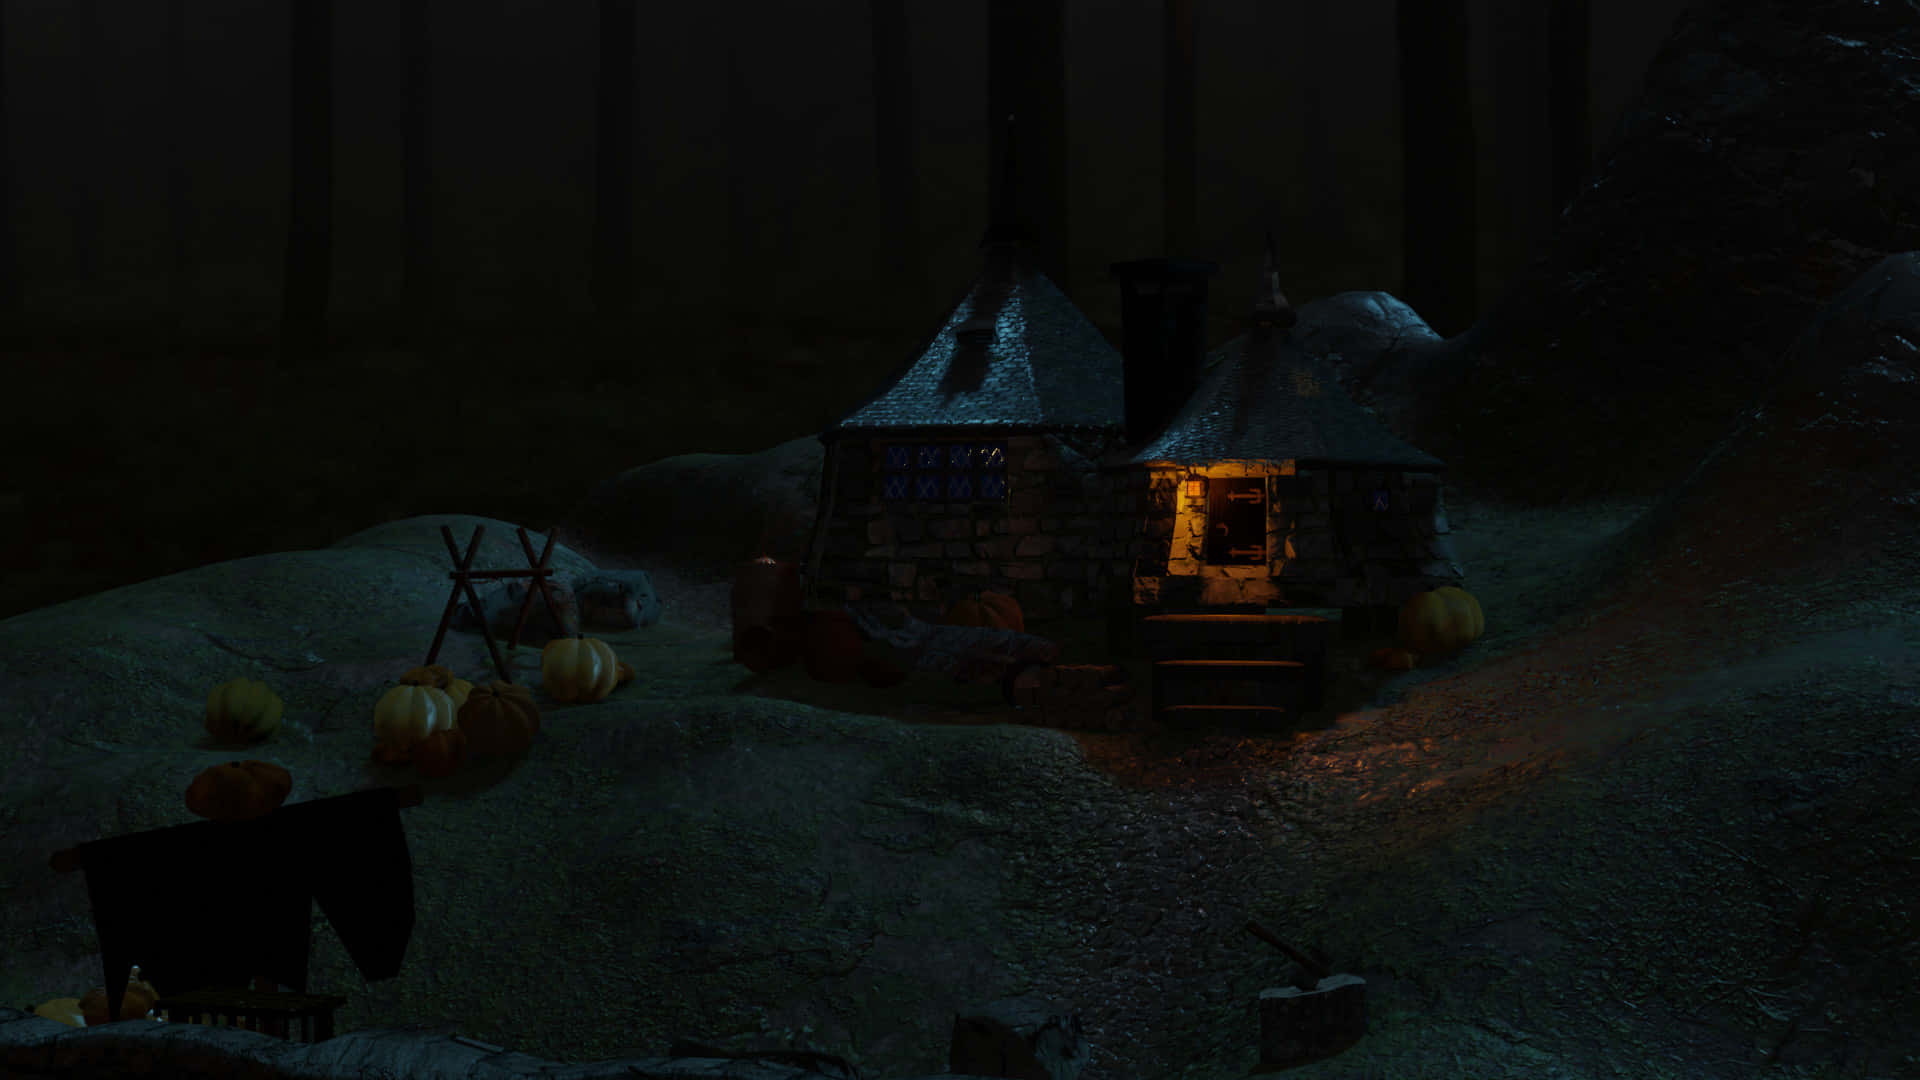 Hagrid's Cozy Hut at Hogwarts School of Witchcraft and Wizardry Wallpaper